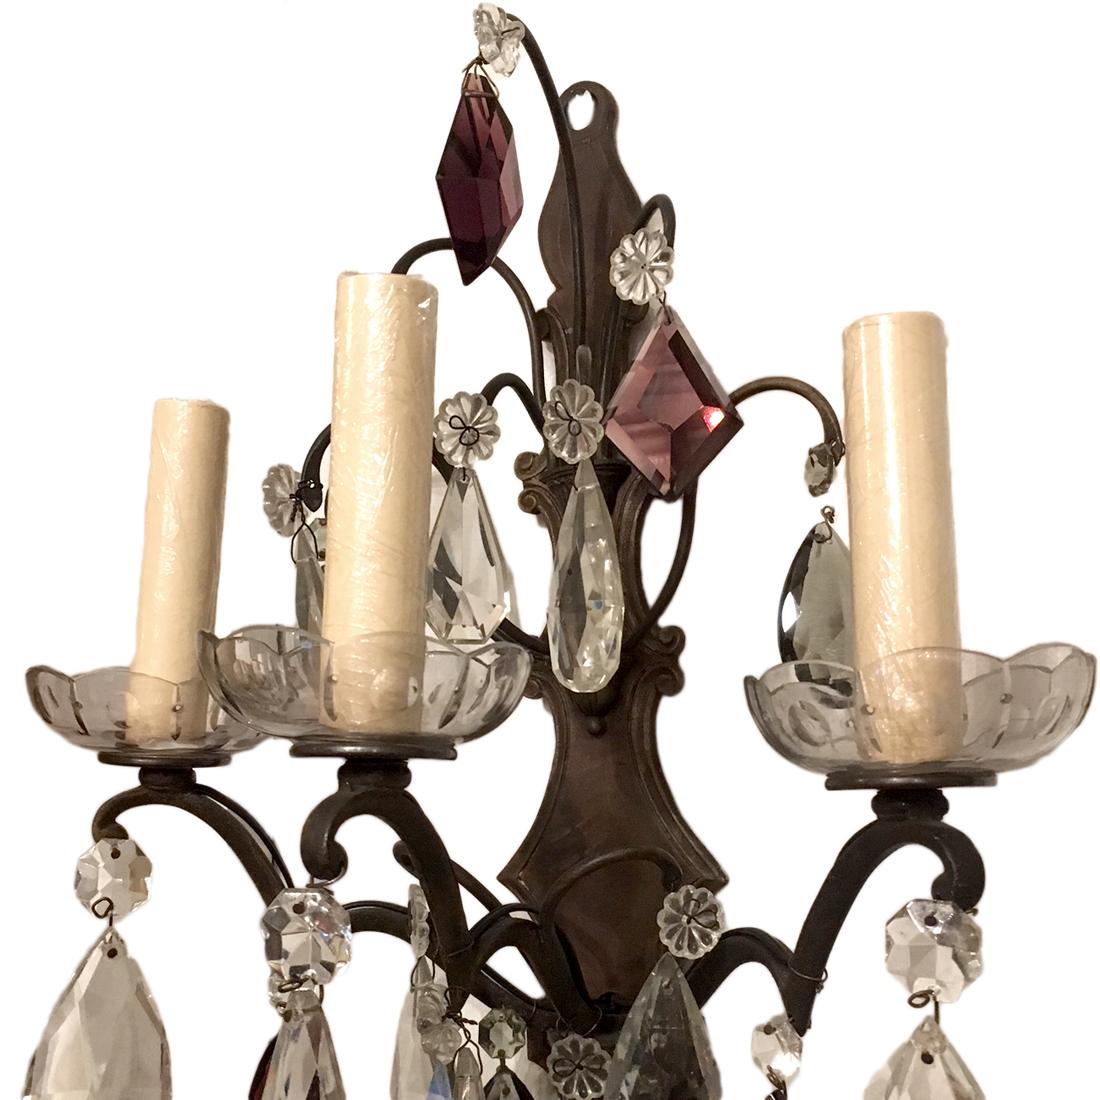 Pair of 1920s French patinated bronze and crystal sconces with 3 lights.
Measurements:
Height 15